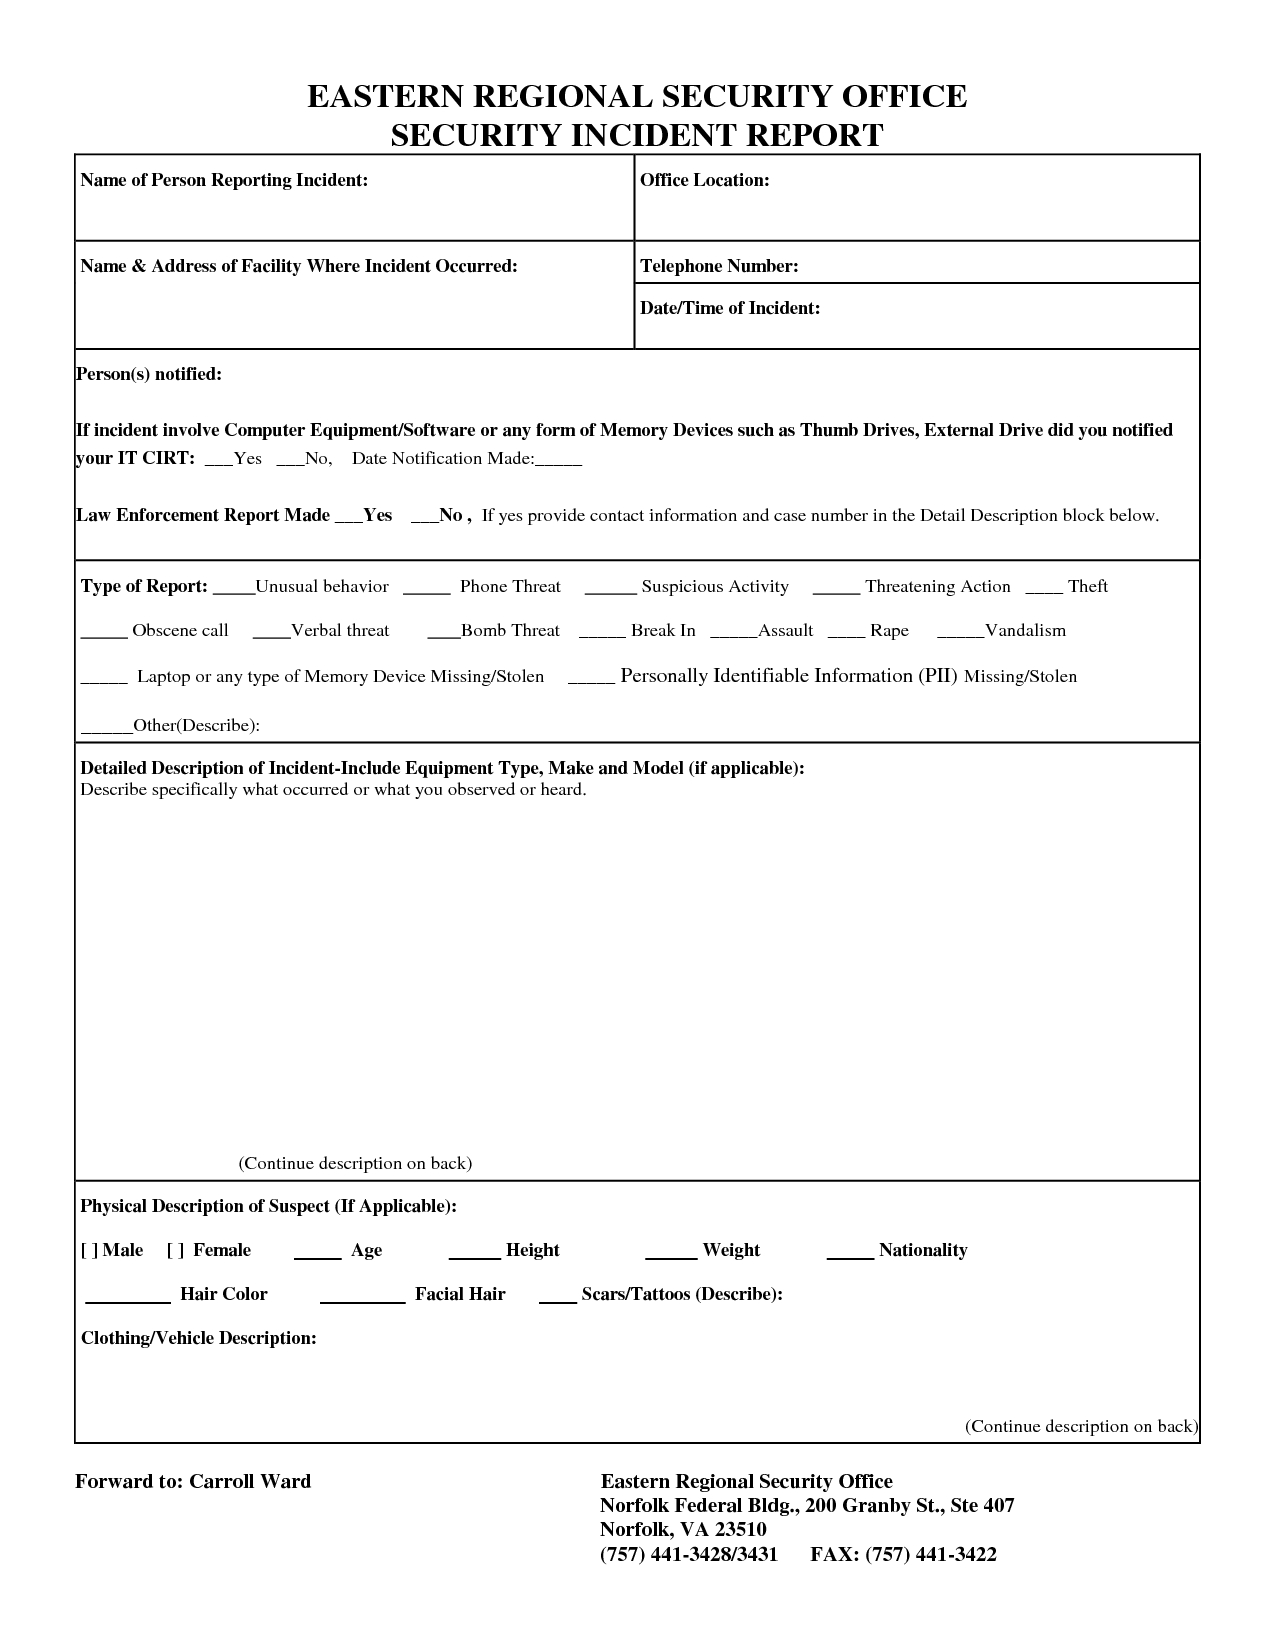 Report Examples School Accident Incident Form Injury Bus With Accident Report Form Template Uk